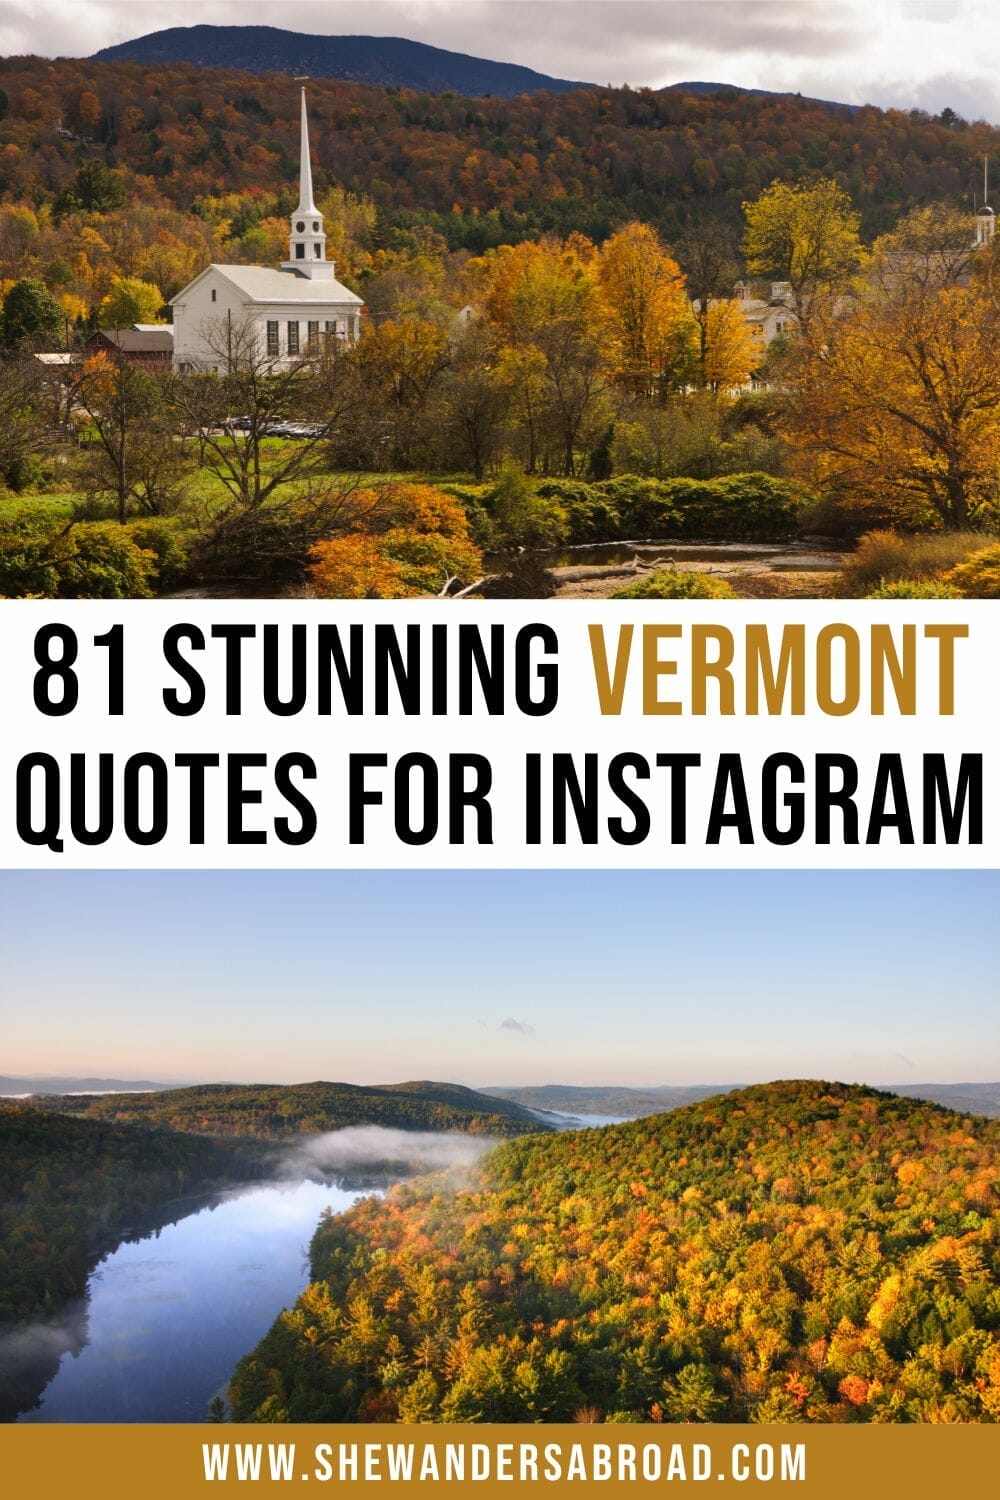 81 Stunning Quotes About Vermont